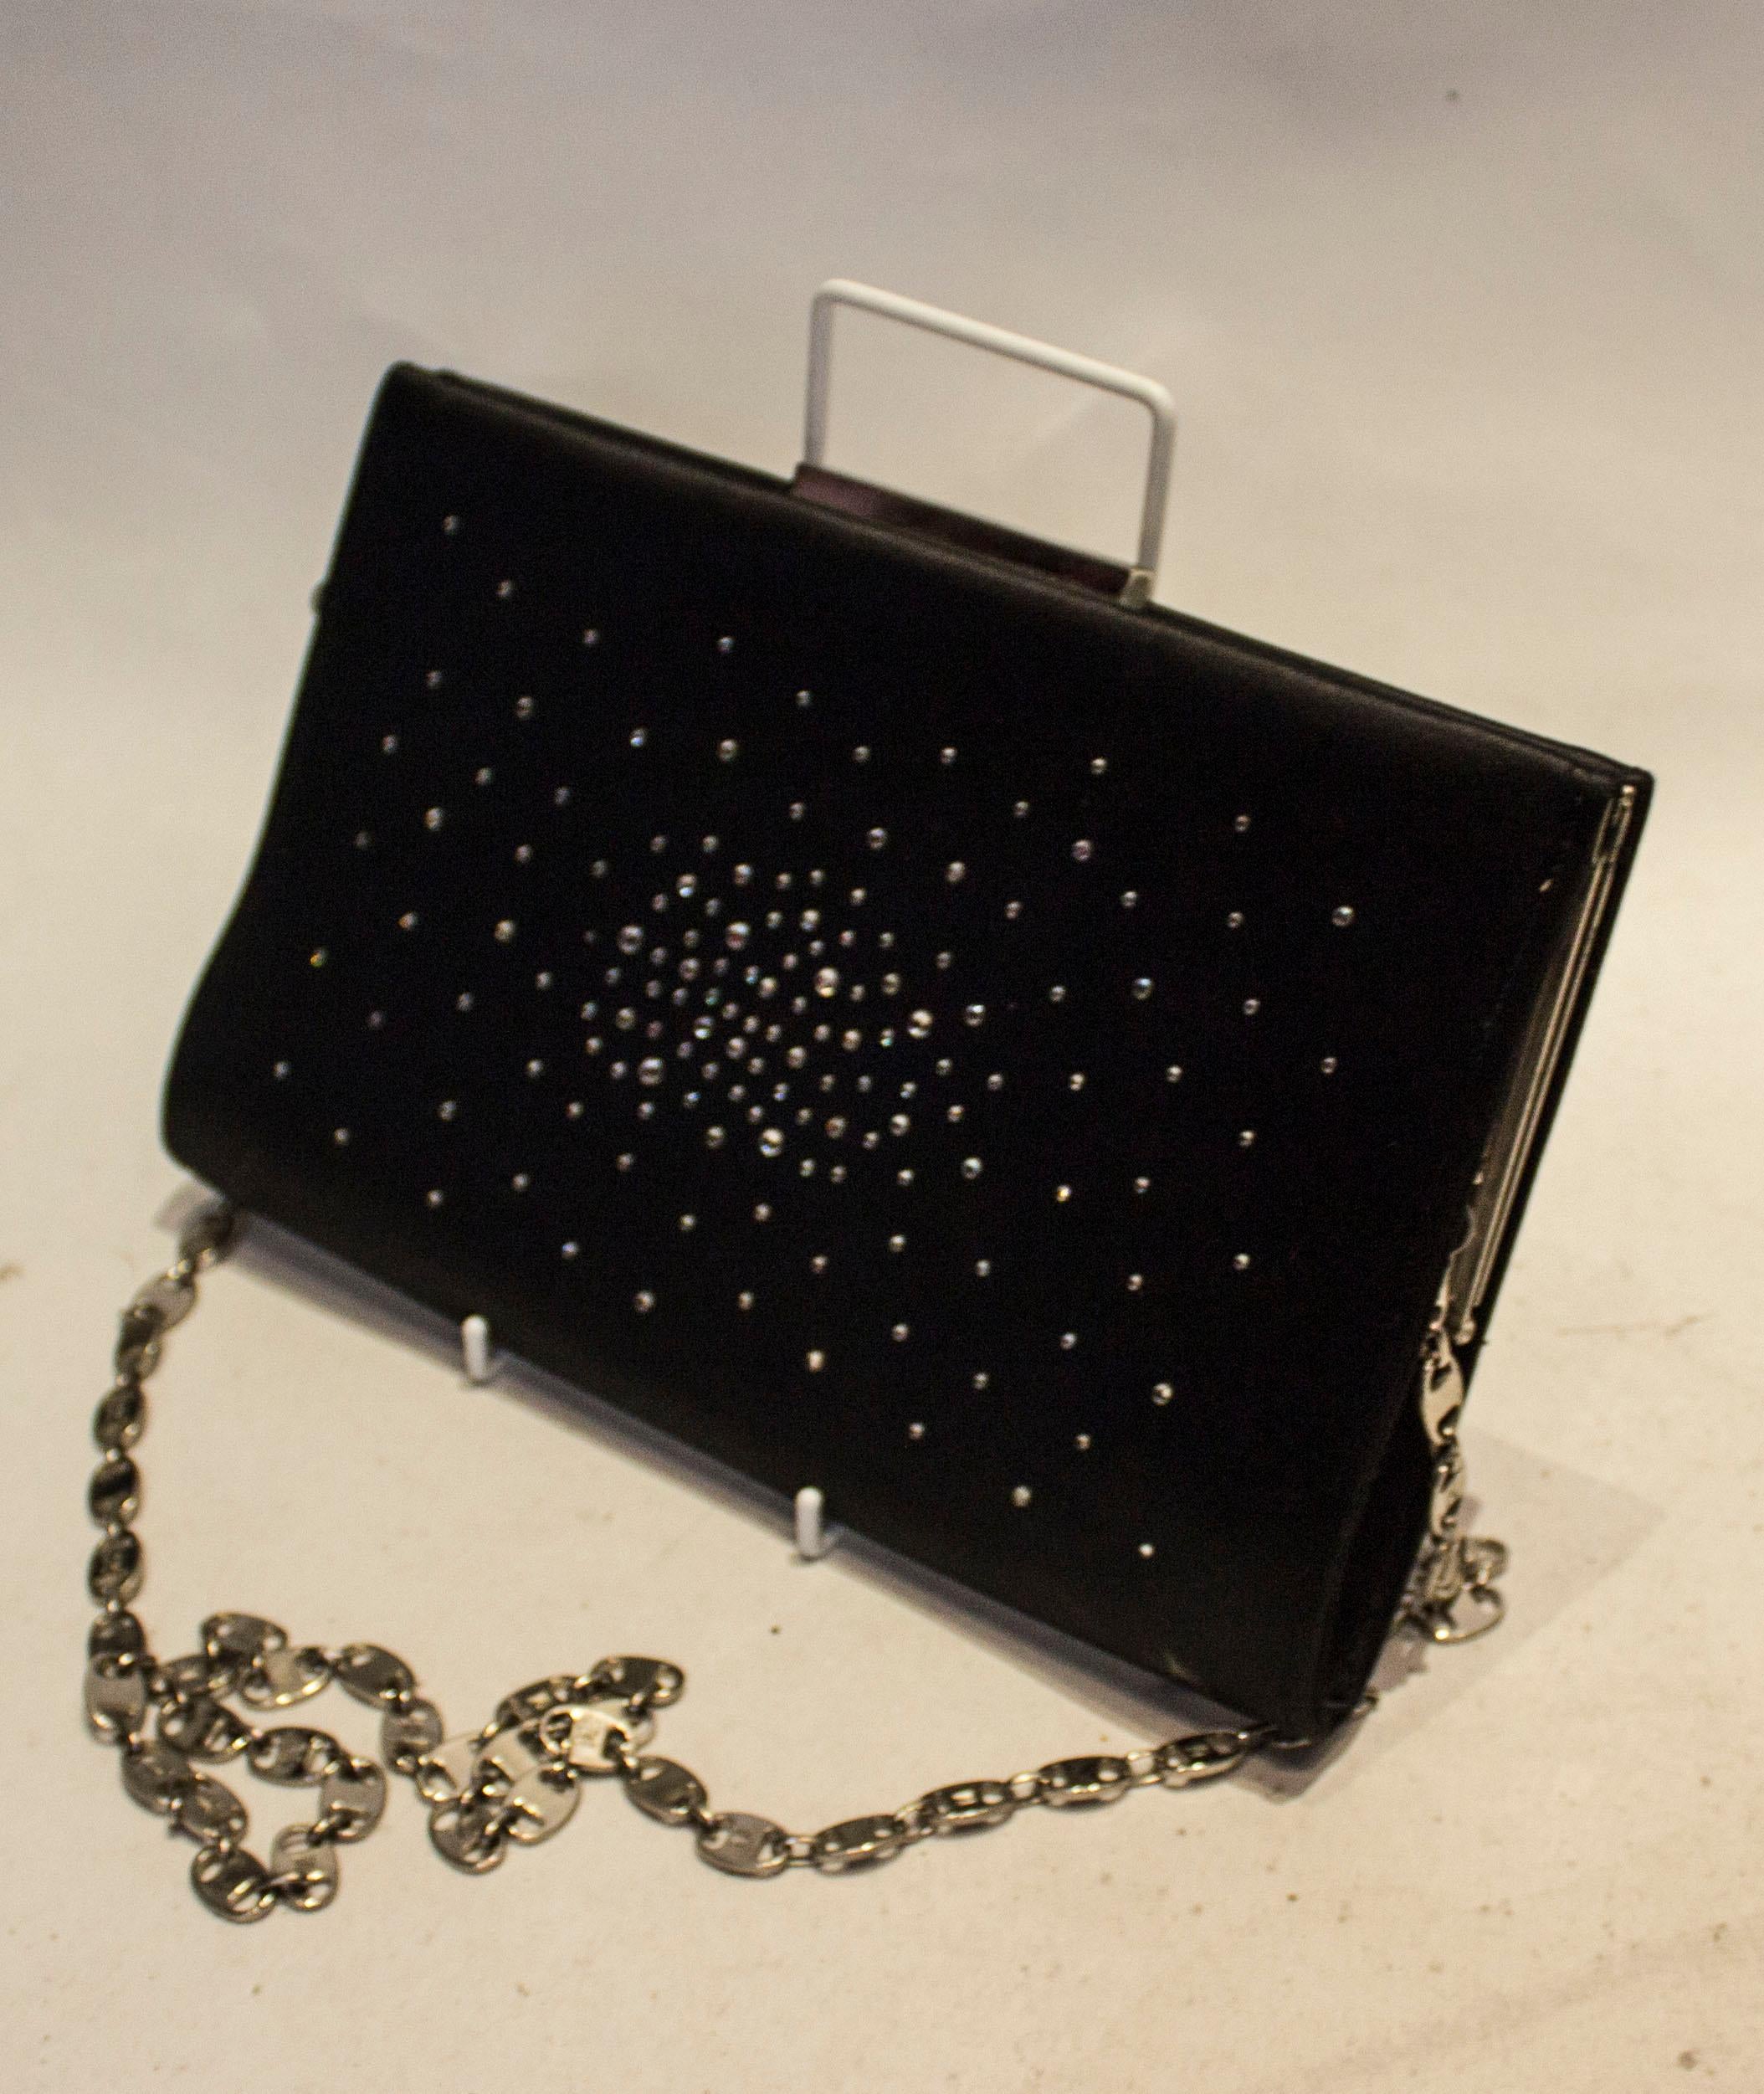 A chic vintage evening bag by Brun Magli Couture. In black satin covered in diamante on both sides, the bags has one internal pouch pocket and a top opening.

Measurements: Width 10 1/2'', height 6 1/2'', depth 1 1/2'', chain handle length 43''.